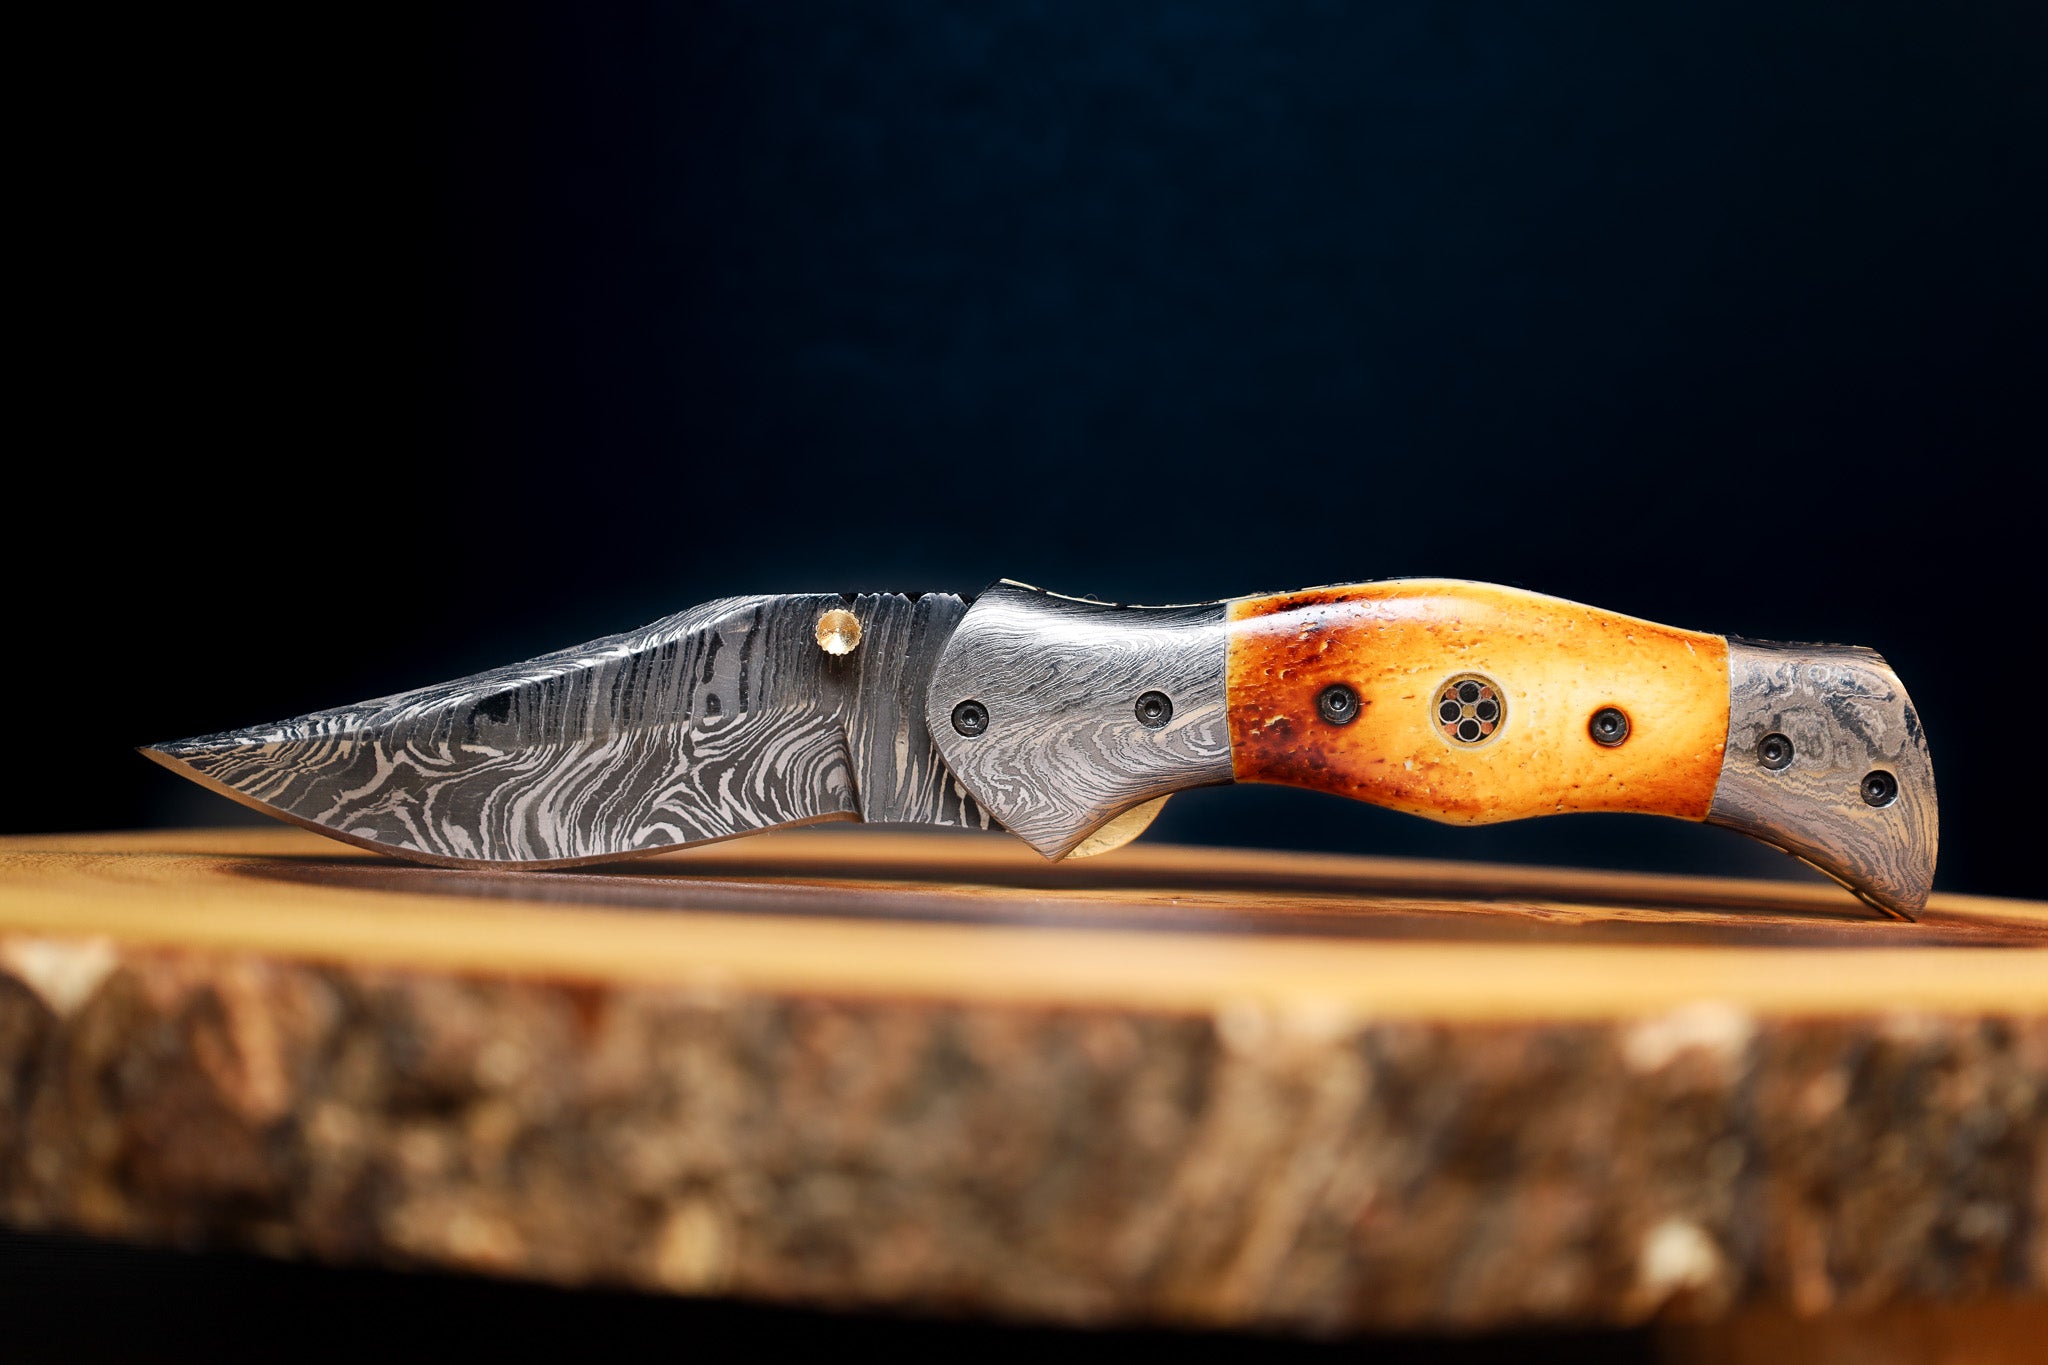 How to Remove Rust from Damascus Steel?